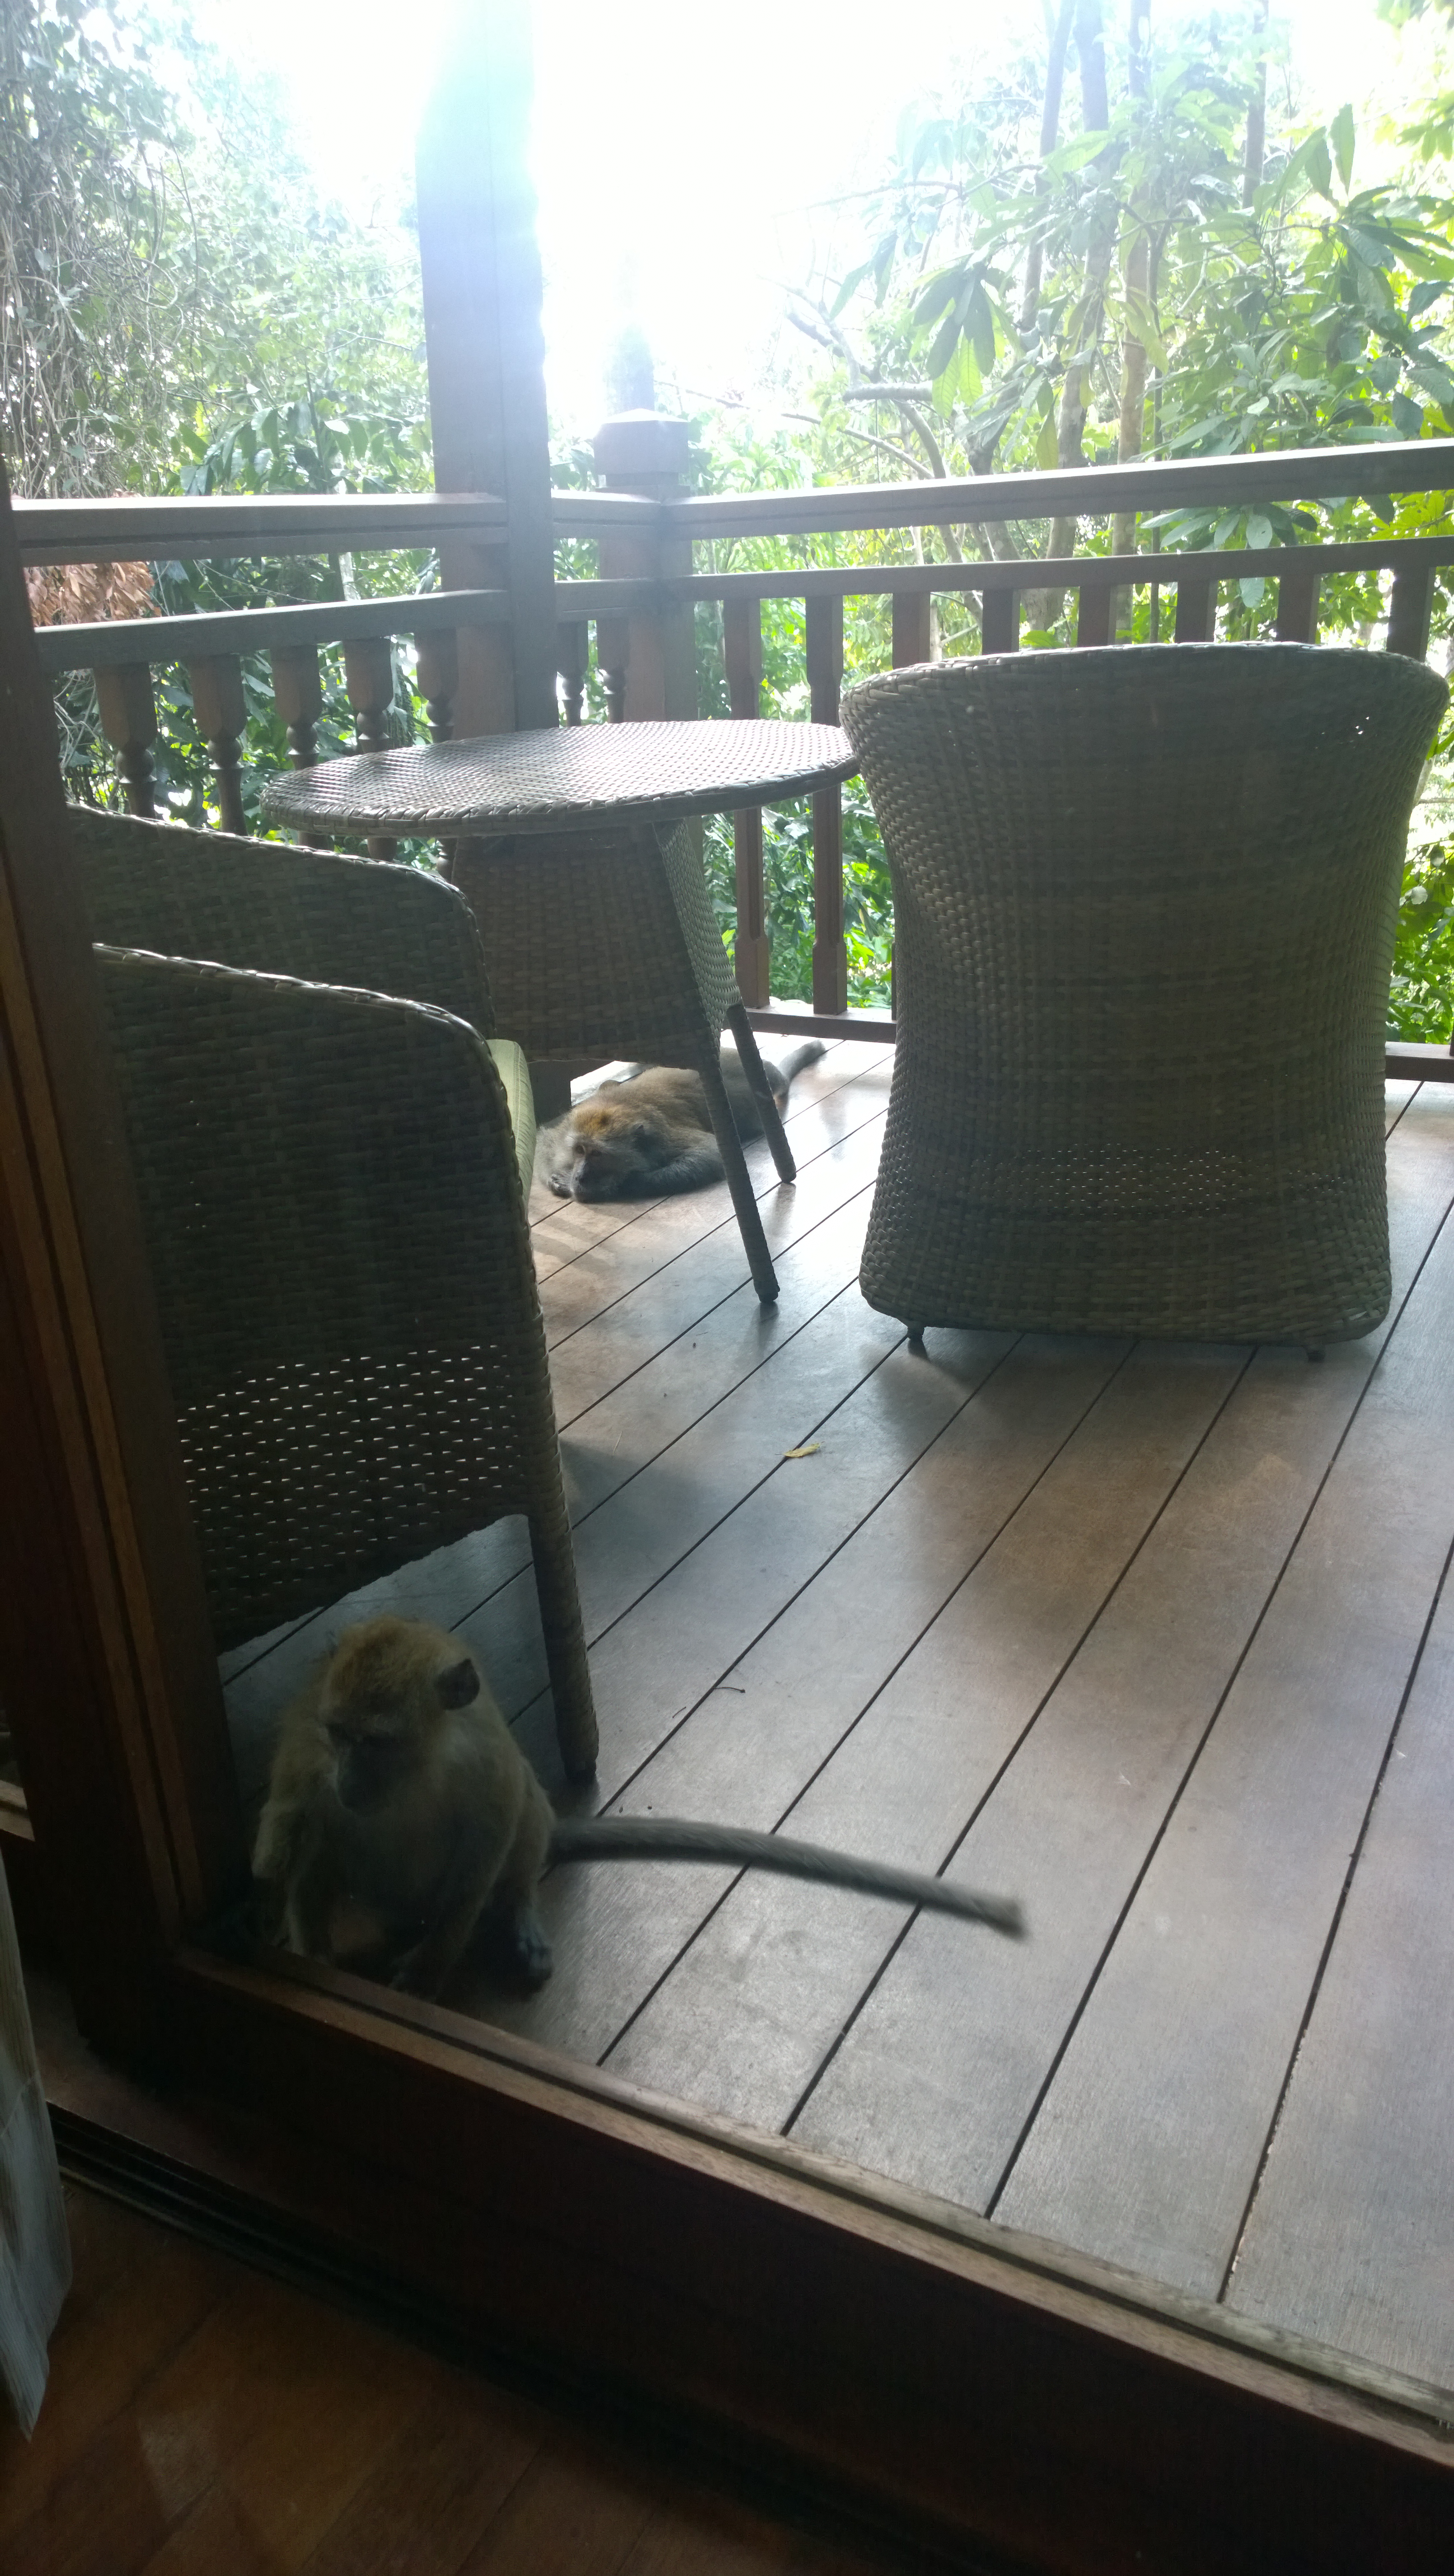 Macaques hanging out on my hotel room balcony